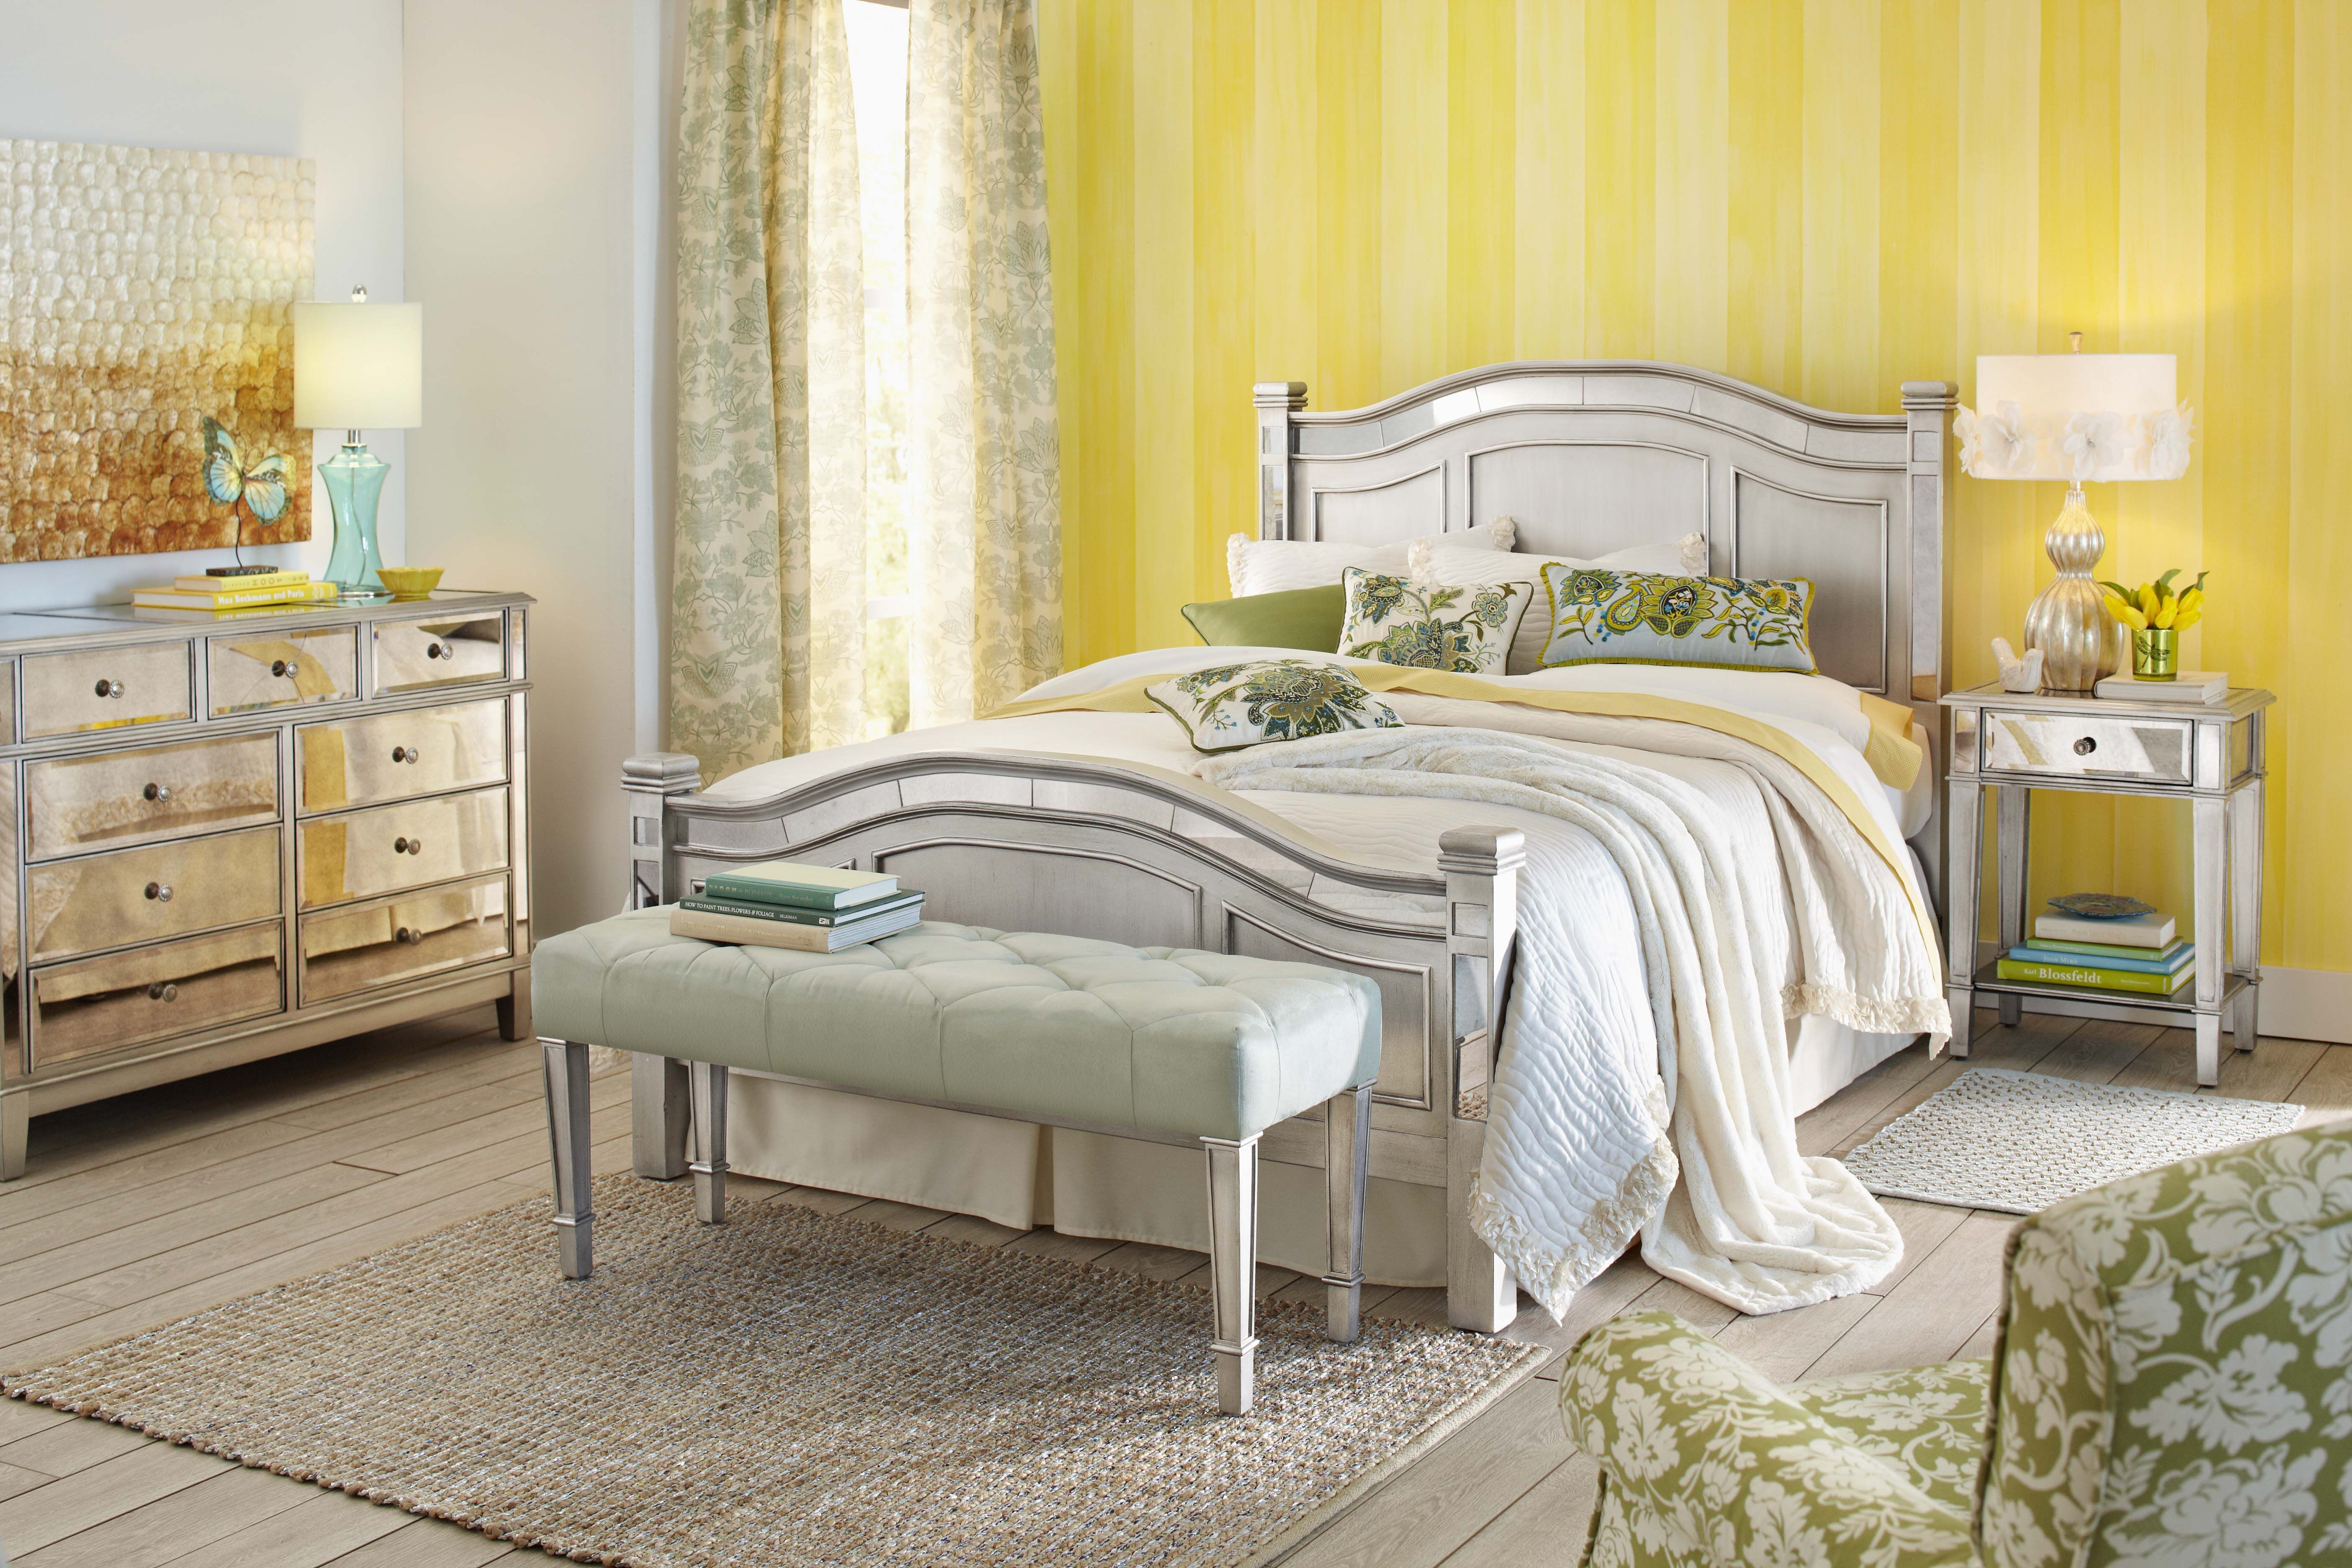 Pier 1 Hayworth Mirrored Bedroom For The Home Mirrored Bedroom within measurements 5616 X 3744